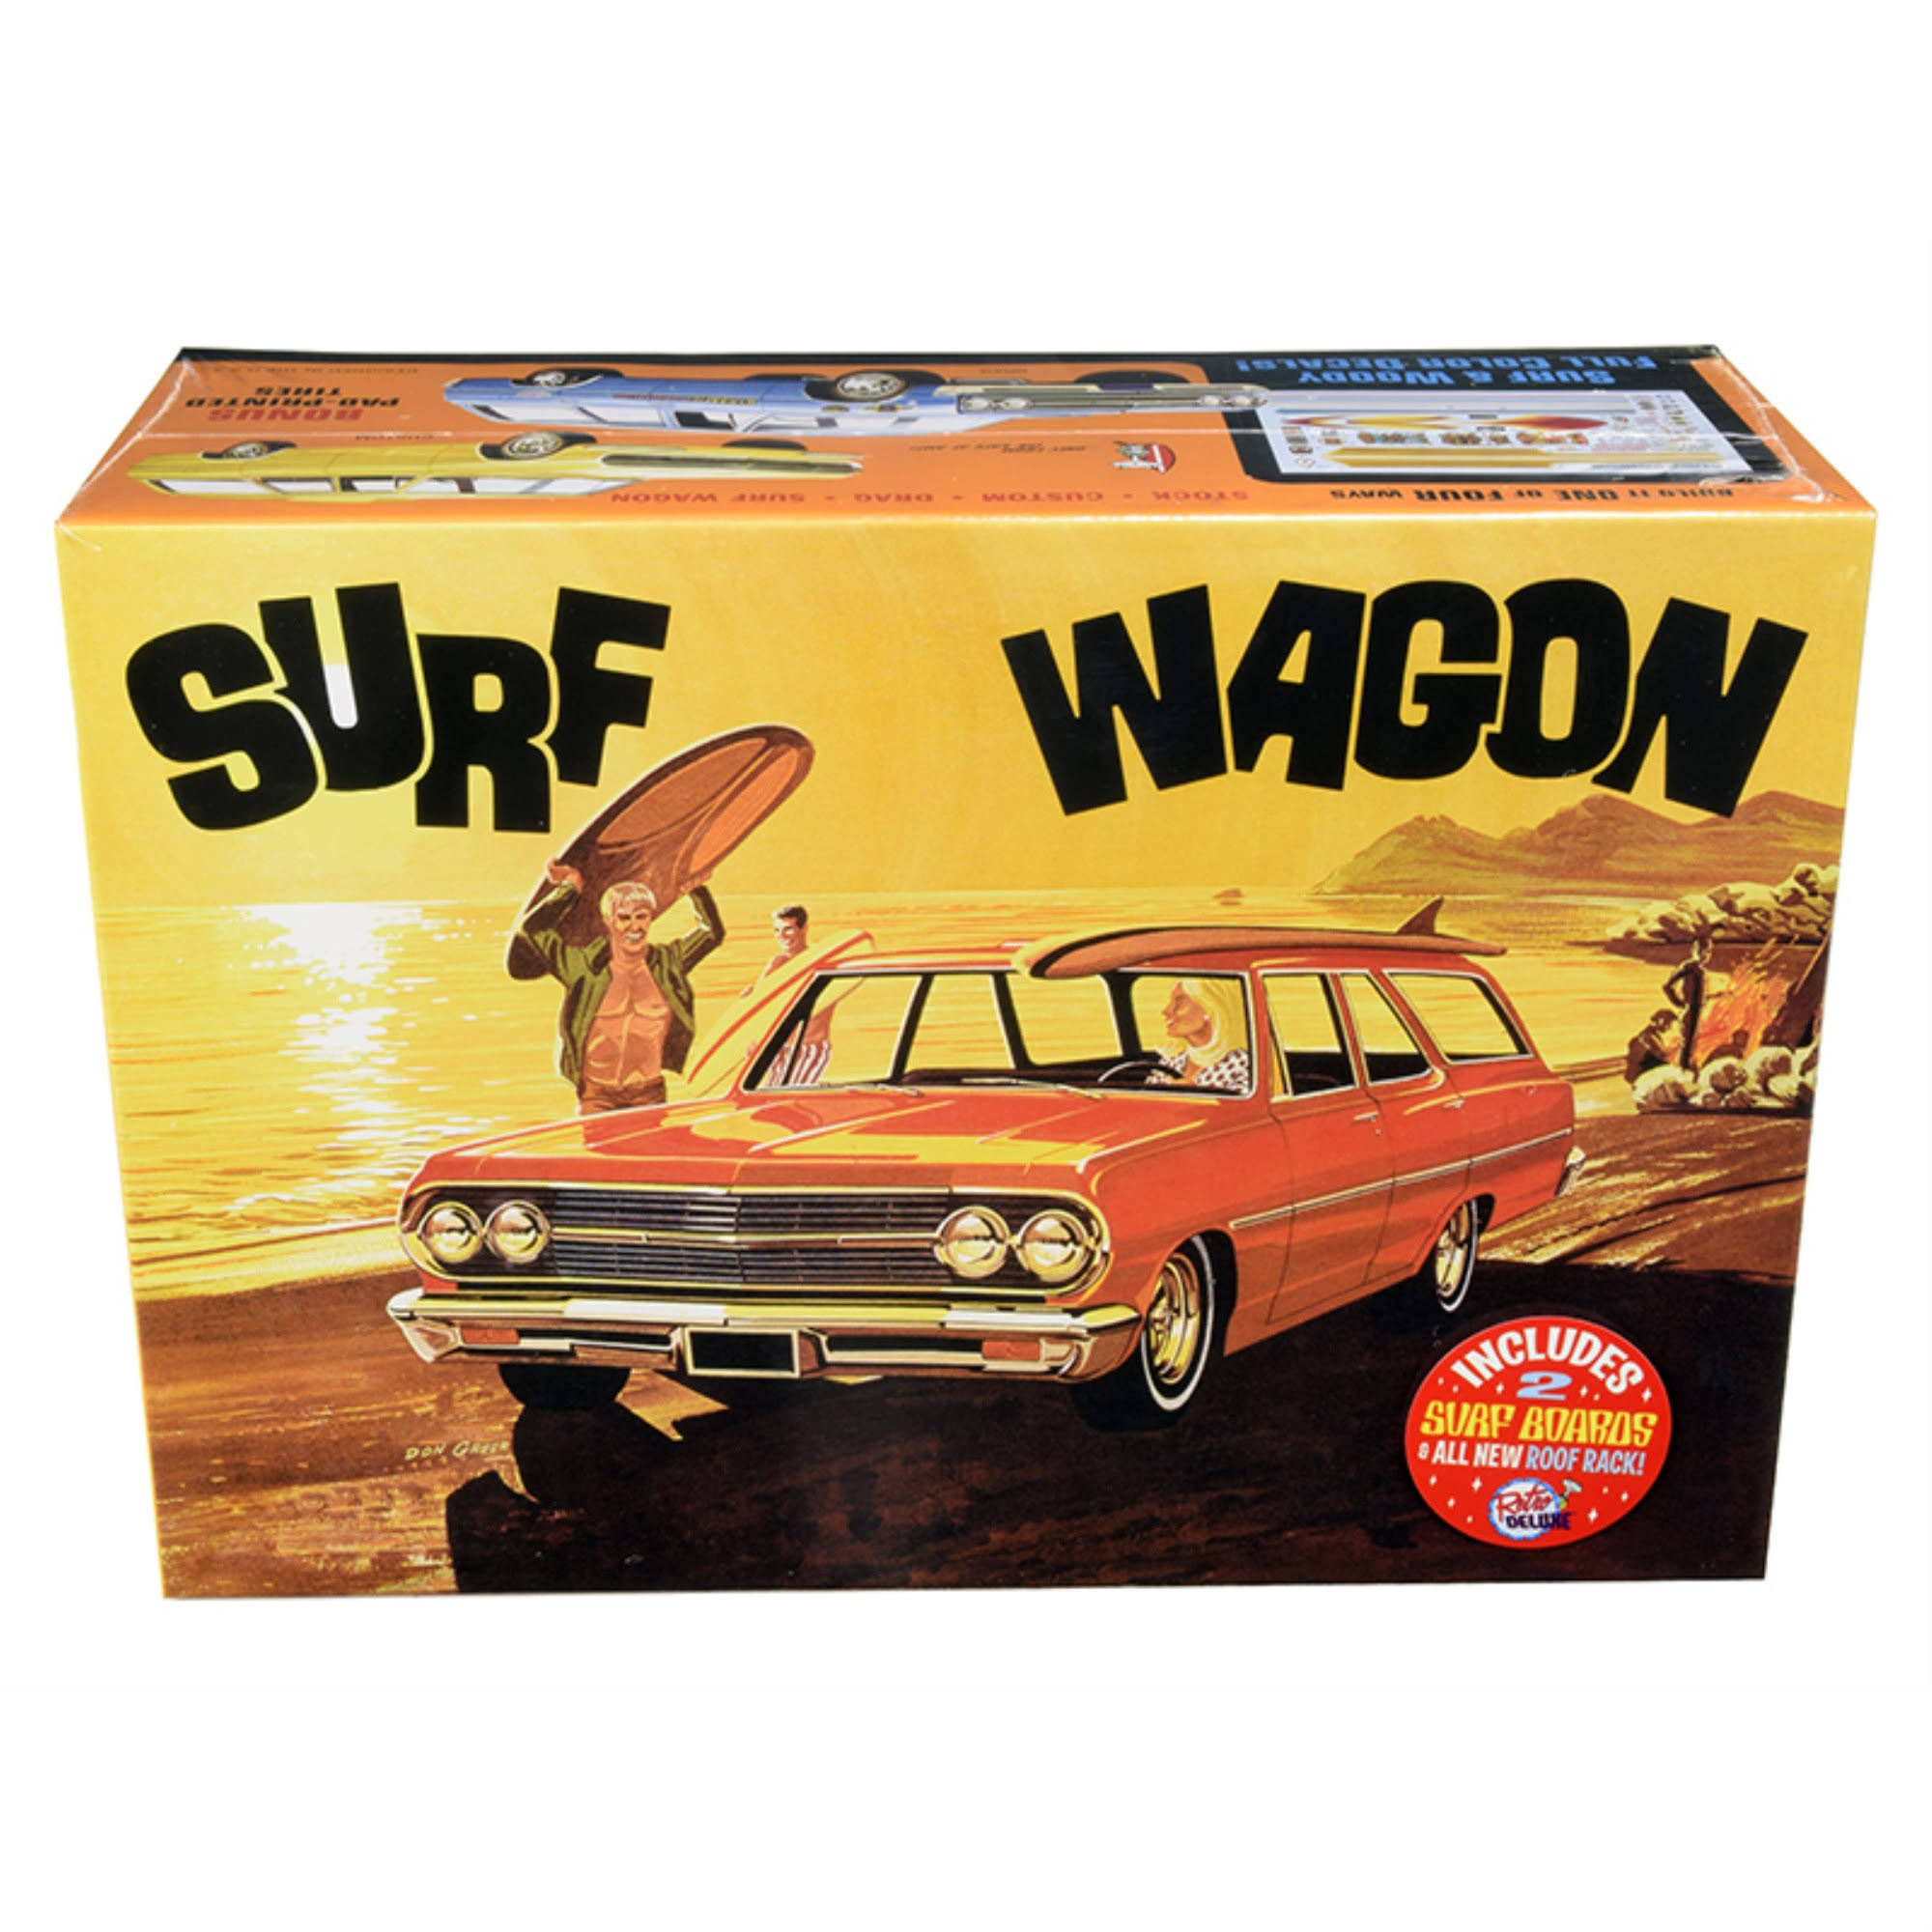 Amt 1965 Chevy Chevelle Surf Wagon Model Car Kit